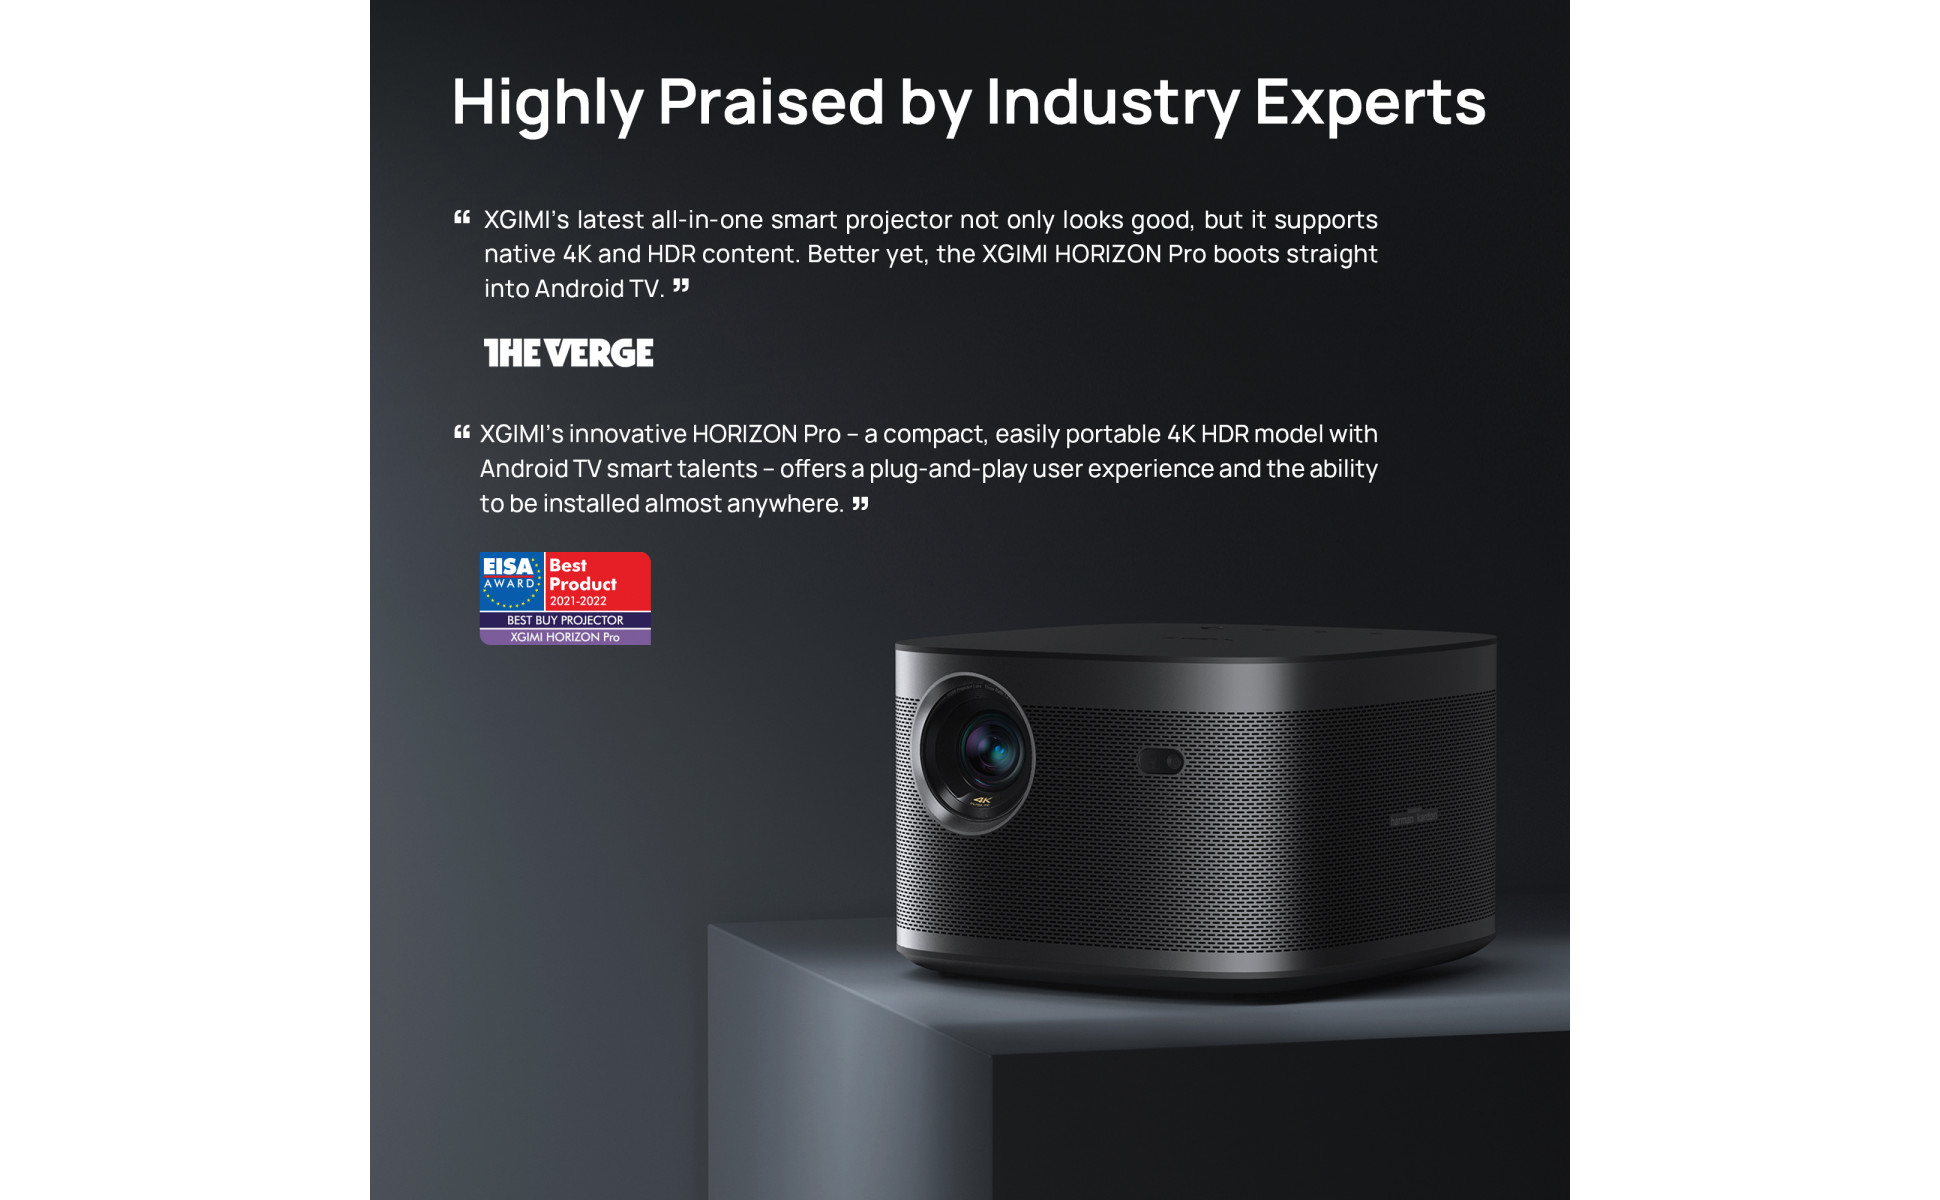 XGIMI - HORIZON Pro 4K Smart Home Projector with Harman Kardon Speaker and  Android TV - Black 